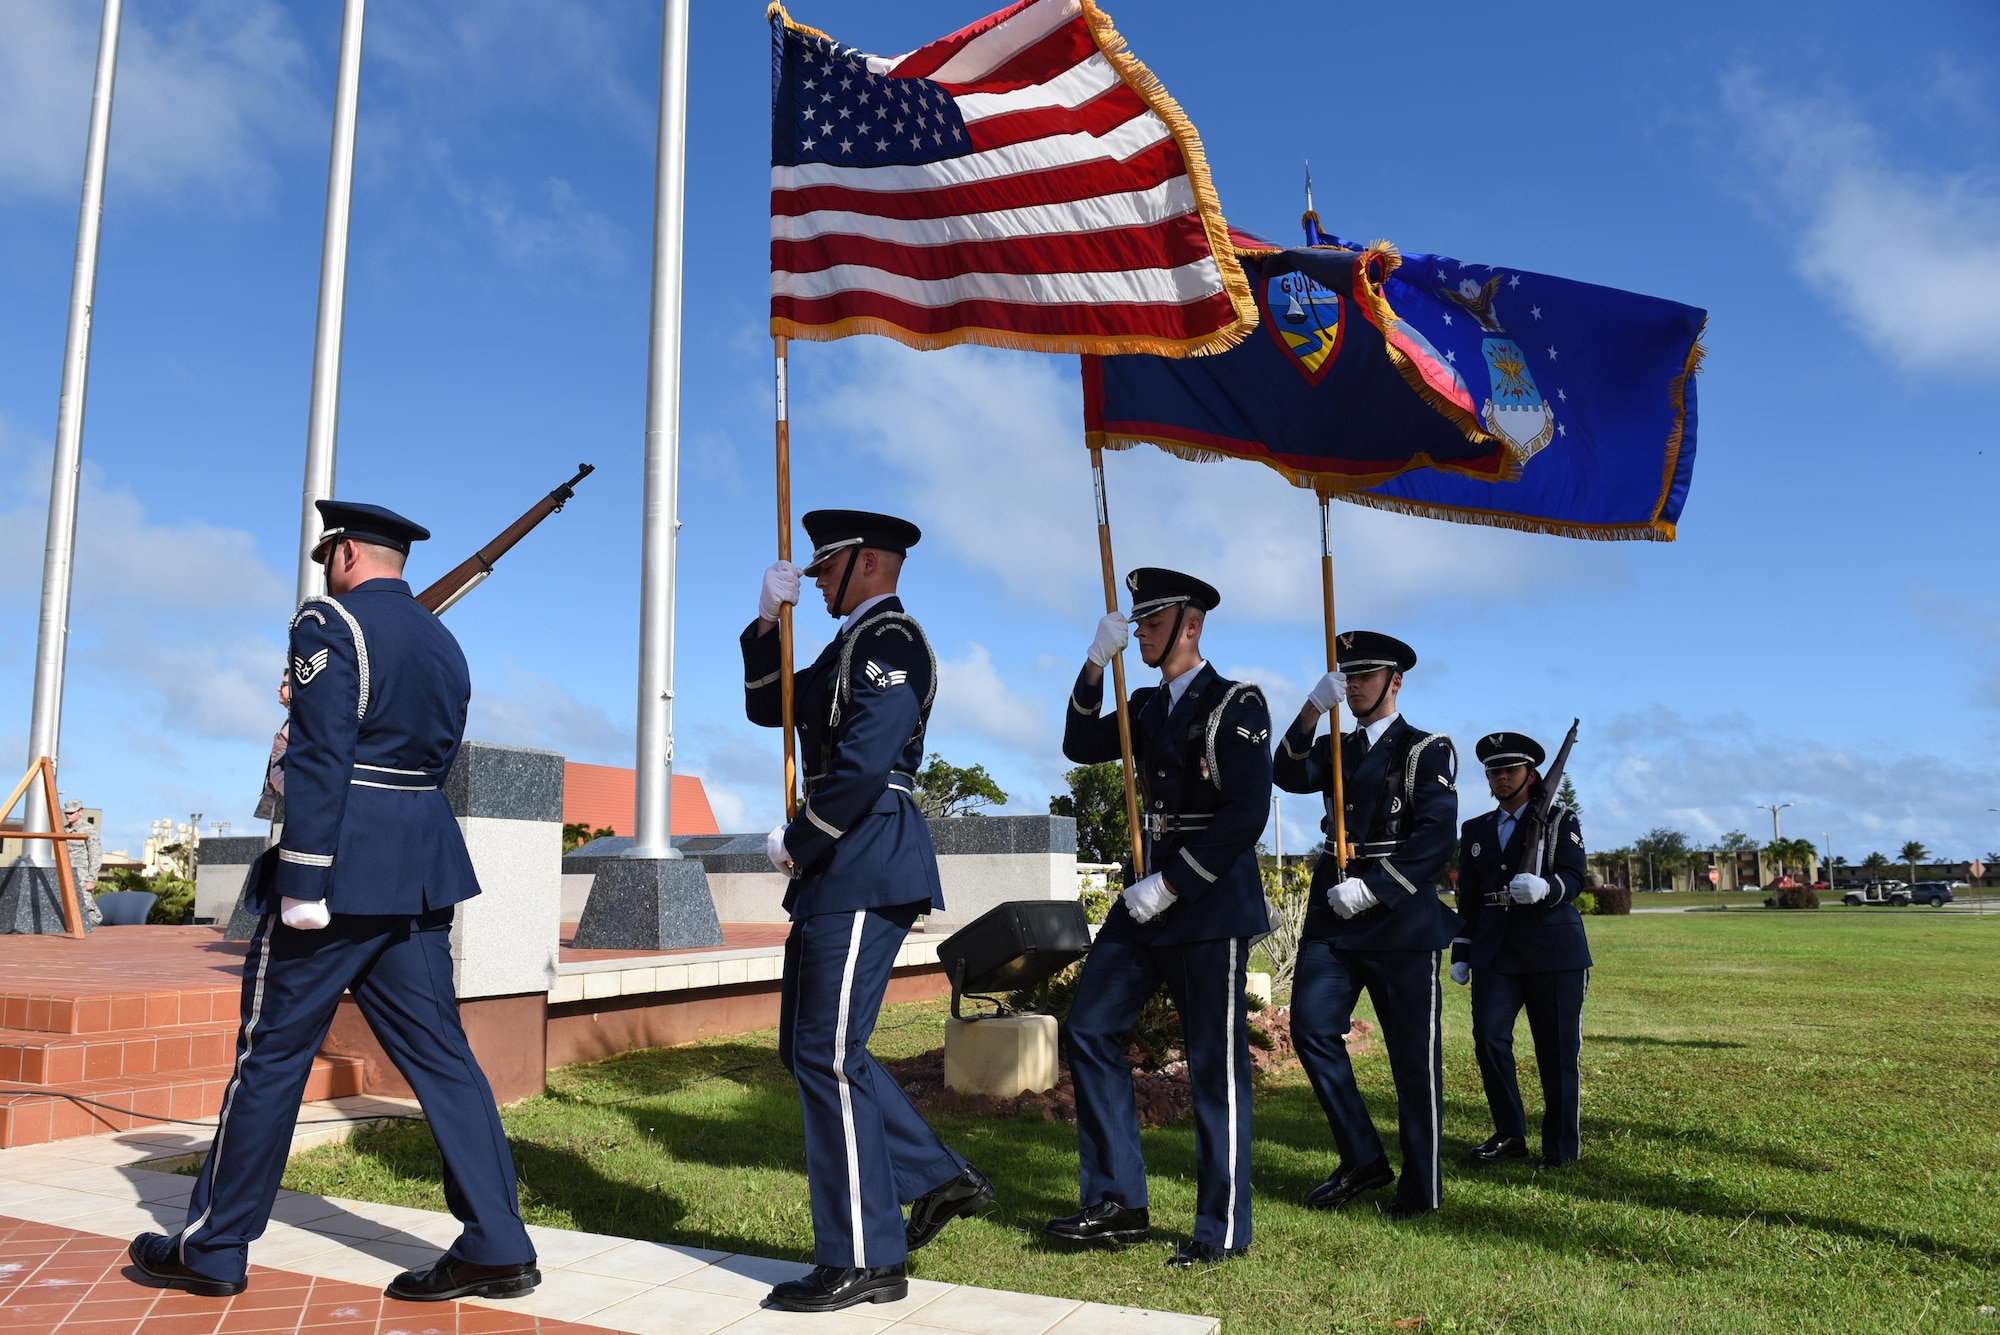 The Andersen Air Force Base Honor Guard presents the colors during the Operation Linebacker II Remembrance Ceremony Dec. 16, 2016, at Andersen Air Force Base, Guam. A ceremony is held annually to remember the 11-day operation and to honor the sacrifices the Airmen made. (U.S. Air Force photo/Airman 1st Class Jacob Skovo)